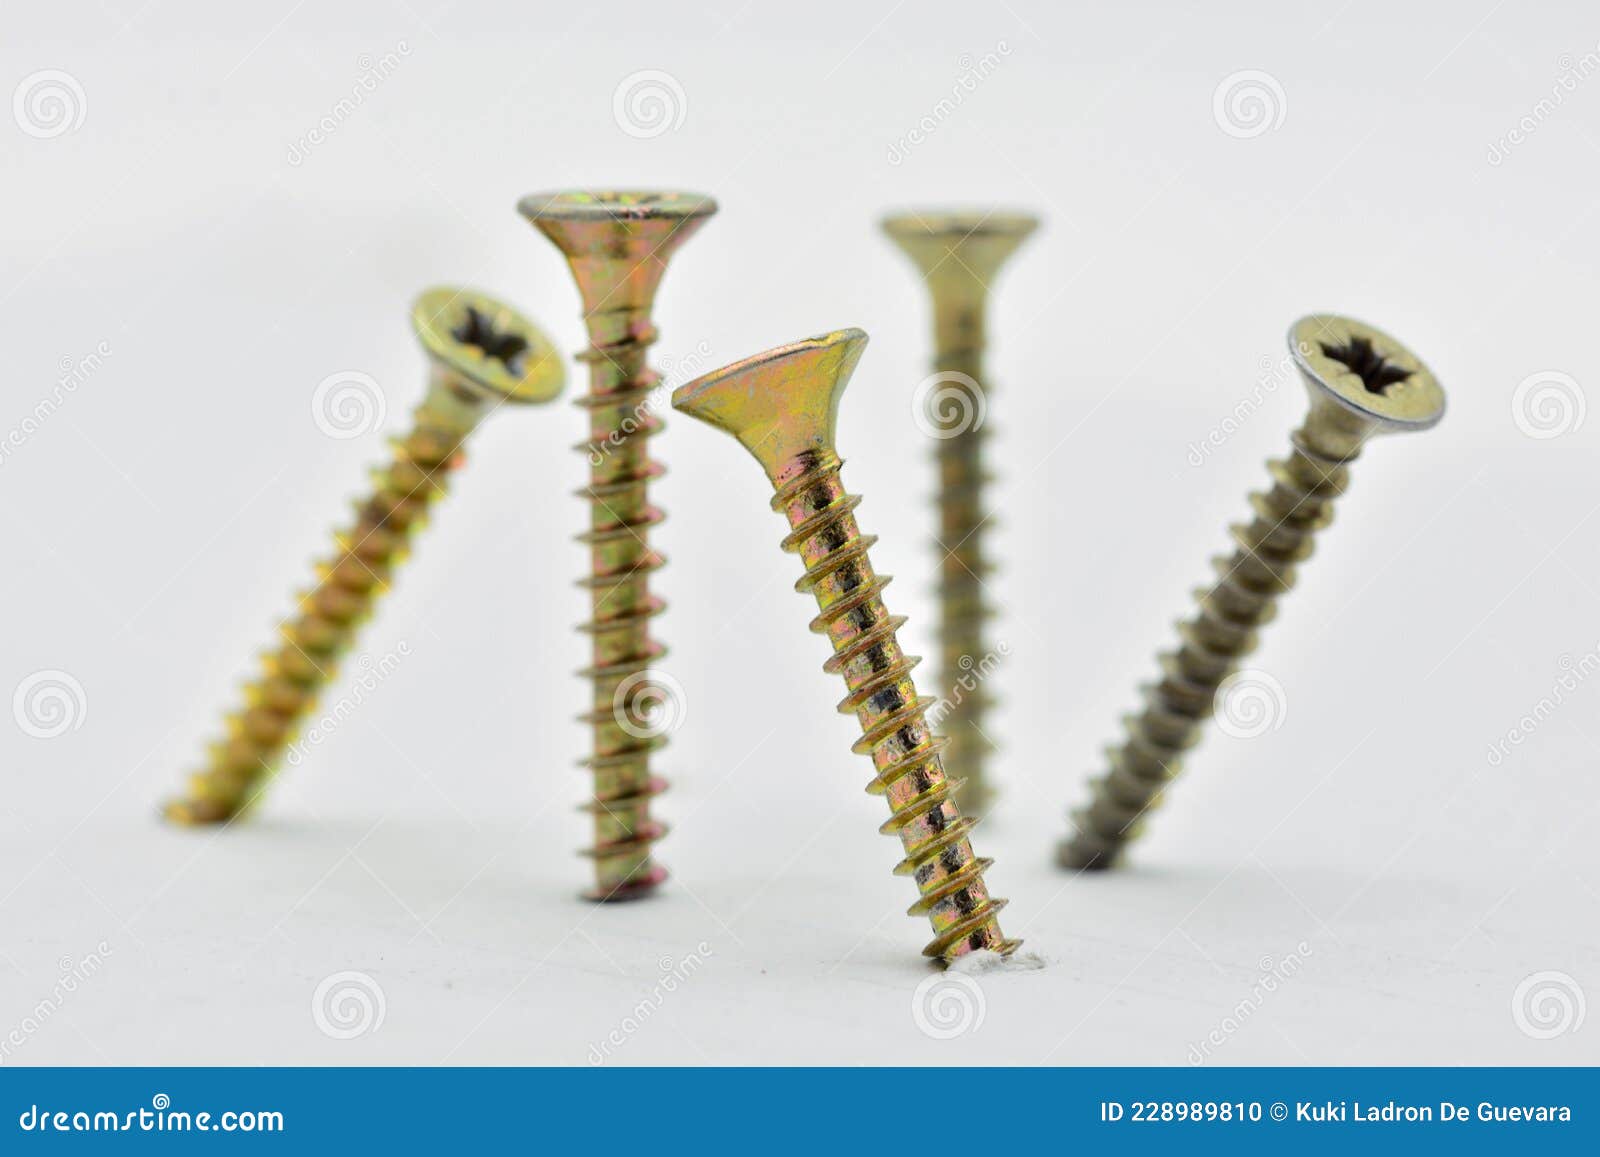 detail of some threaded screws